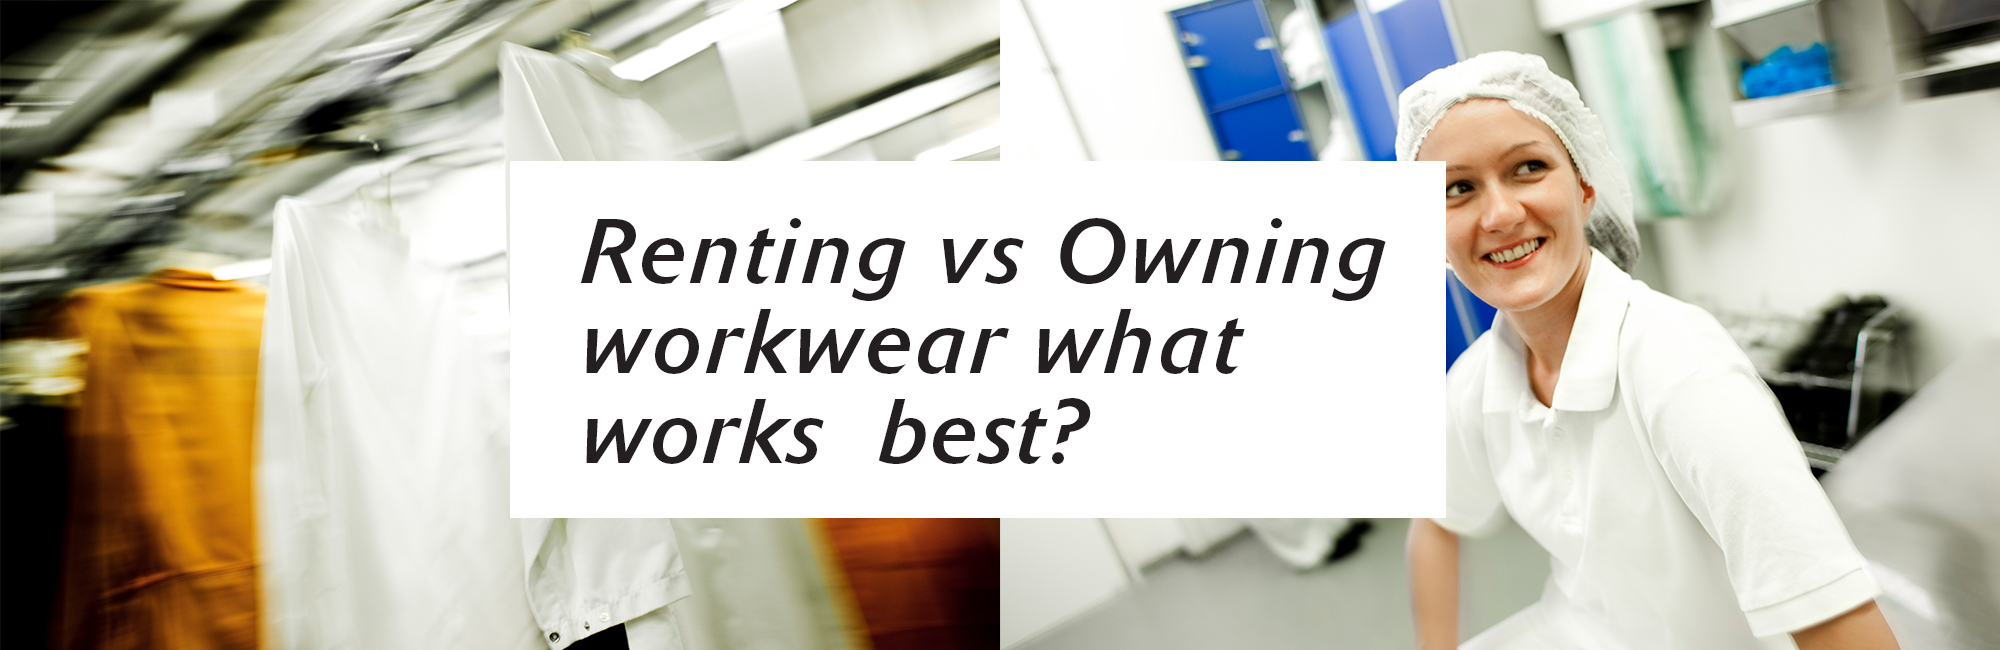 Why companies should rent workwear rather than buy direct - News - CLEAN Services